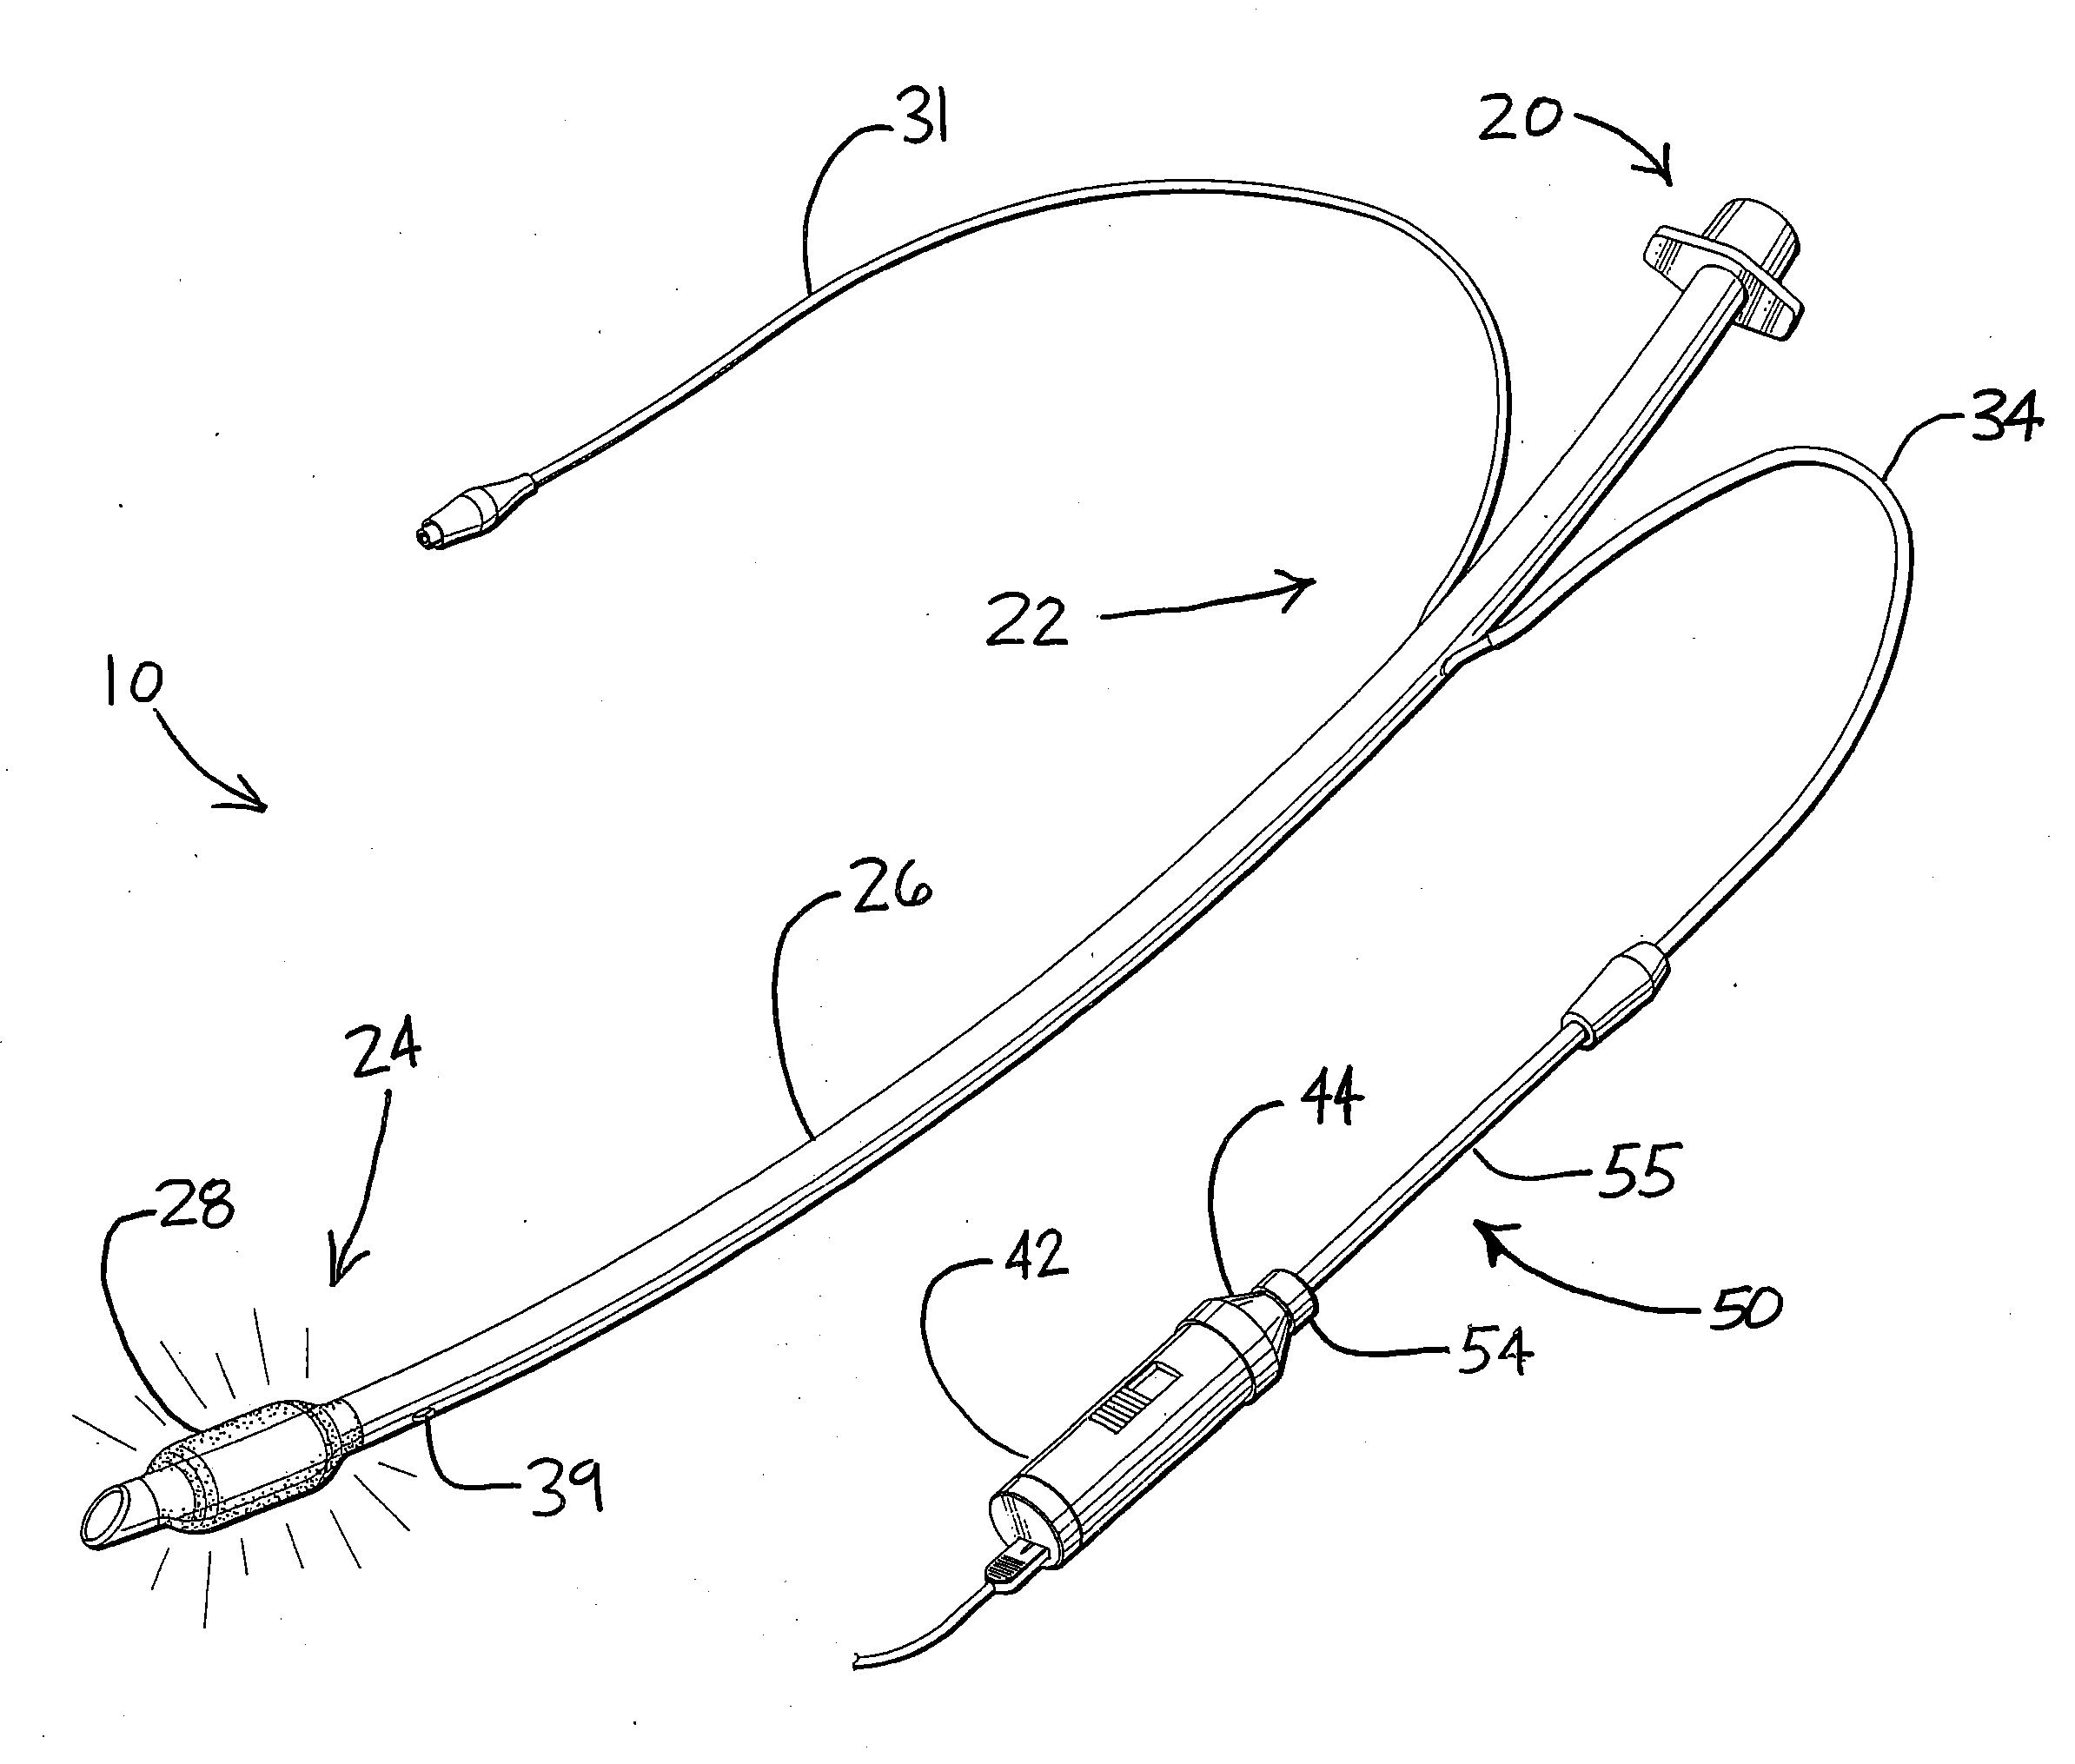 Systems and Methods for Endotracheal Tube Positioning